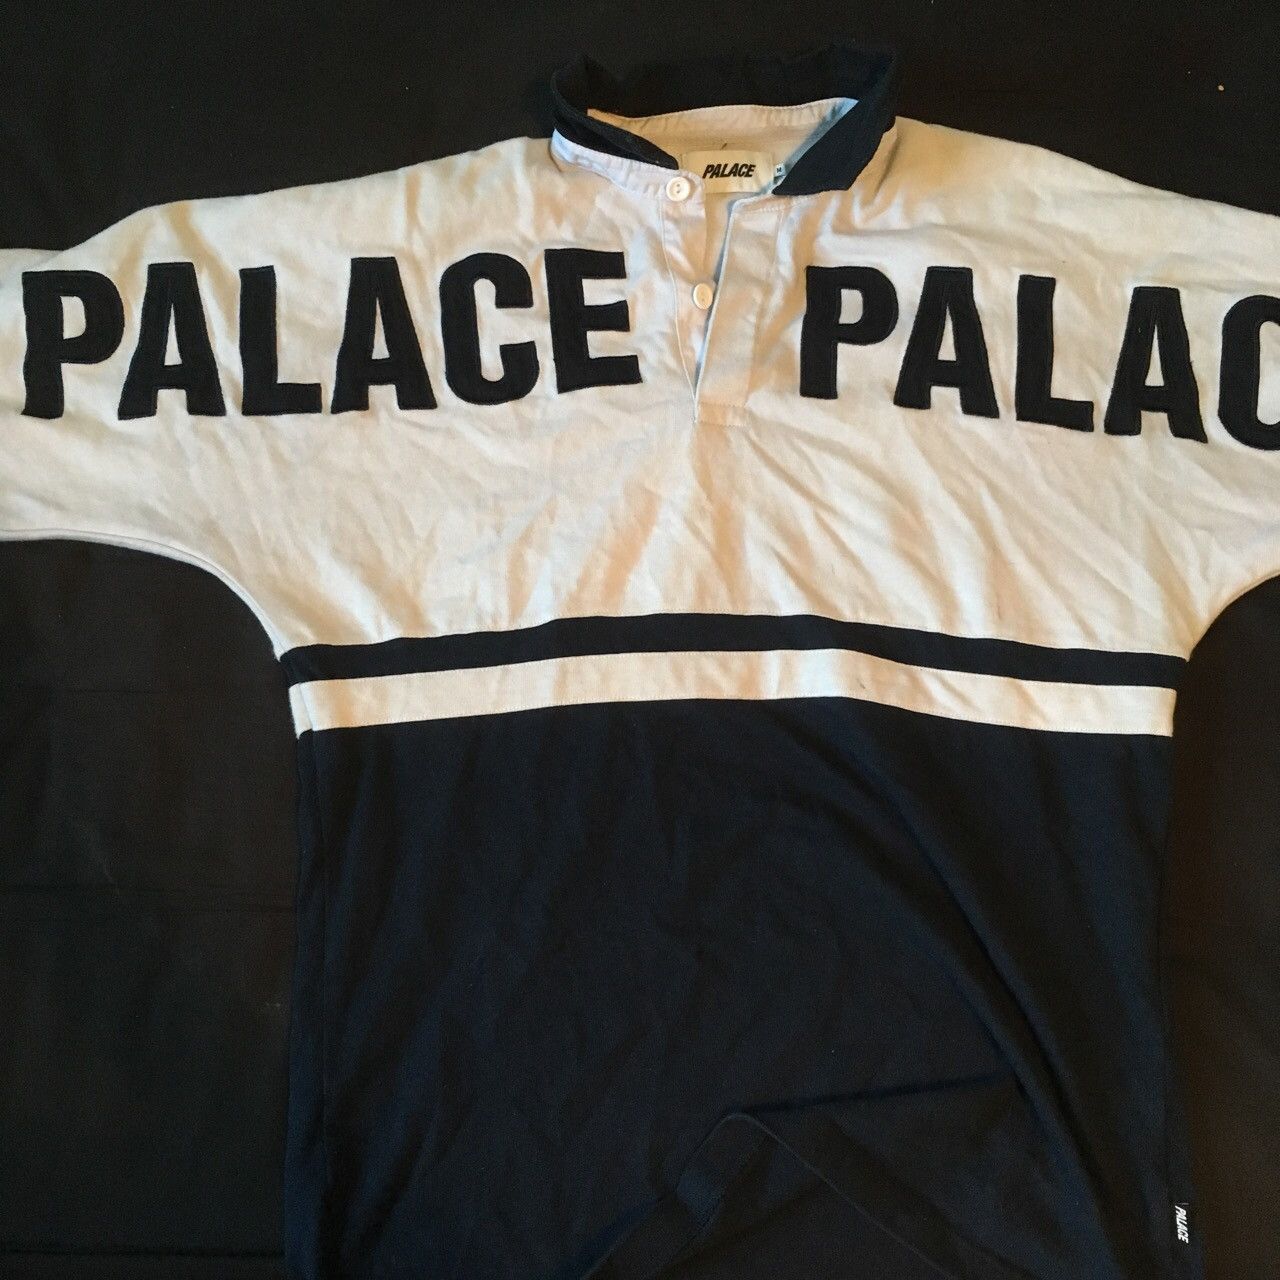 Palace Palace P2 RUGBY TOP | Grailed